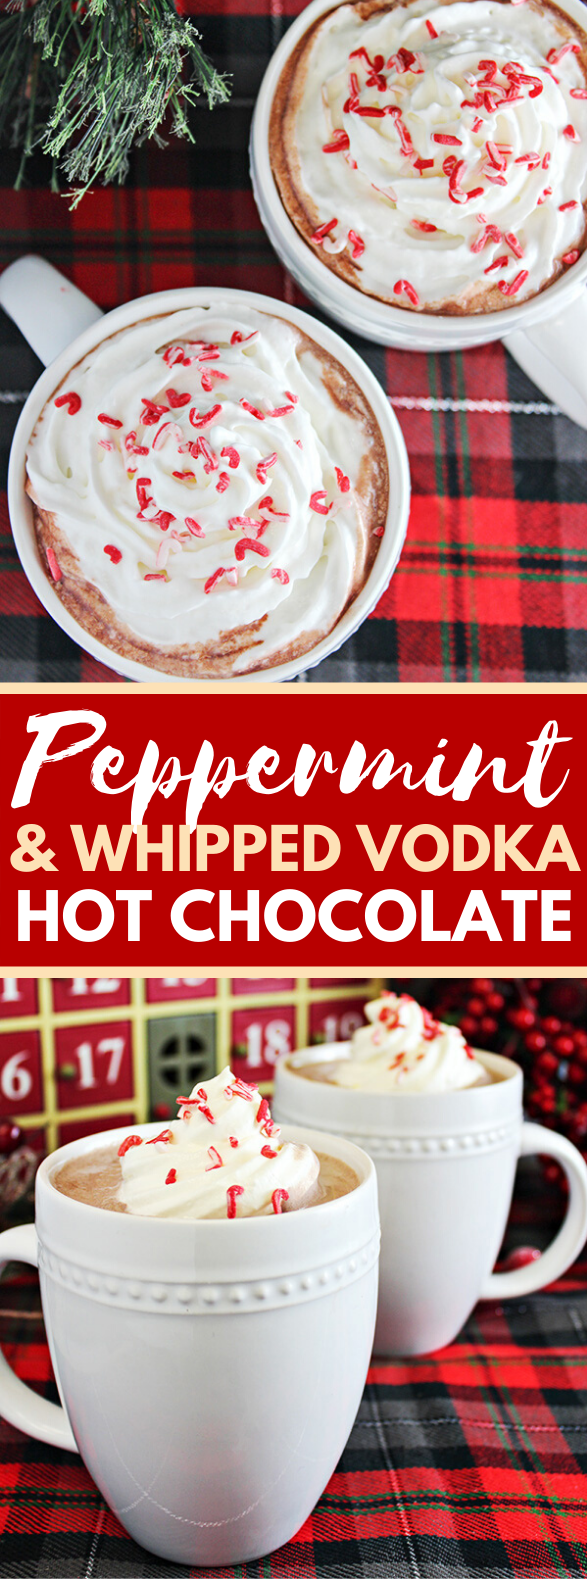 Peppermint & Whipped Vodka Hot Chocolate Recipe #drinks #cocktails